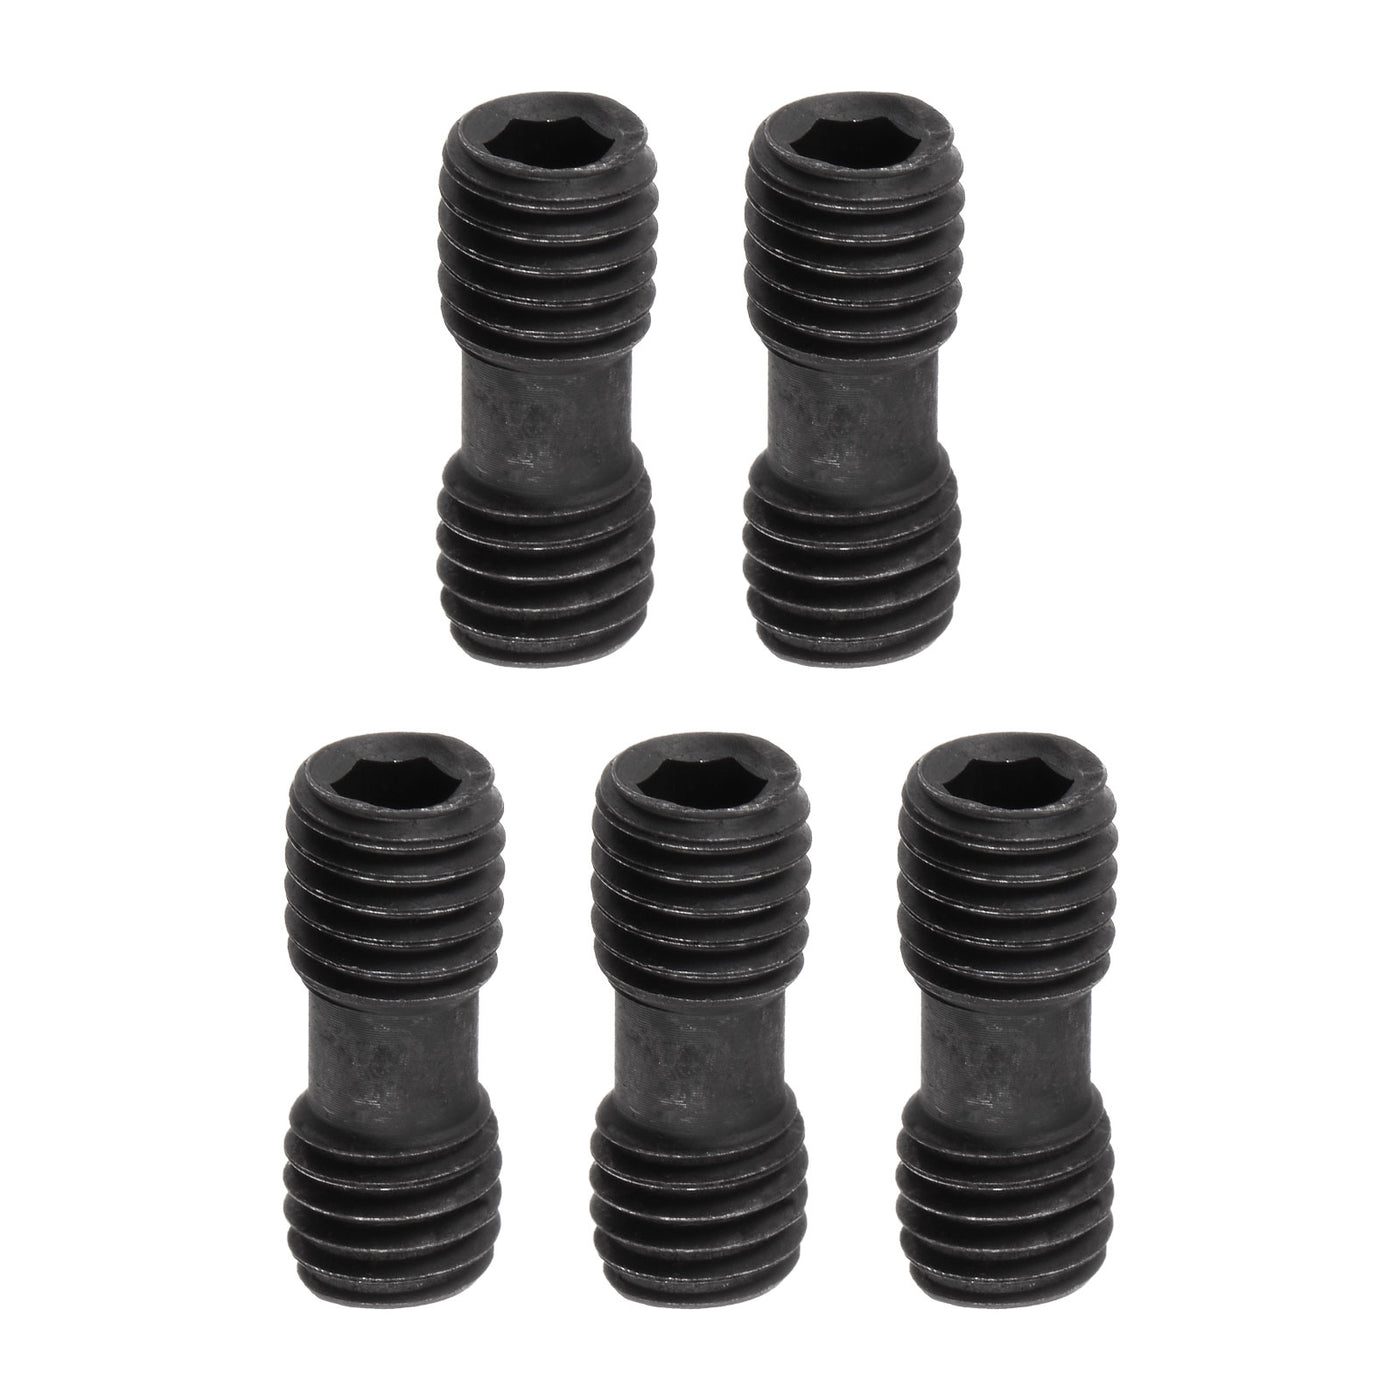 Uxcell Uxcell M8-1.25x20 Hex Head Set Screws for CNC Lathe Turning Tool Holder, 5Pcs